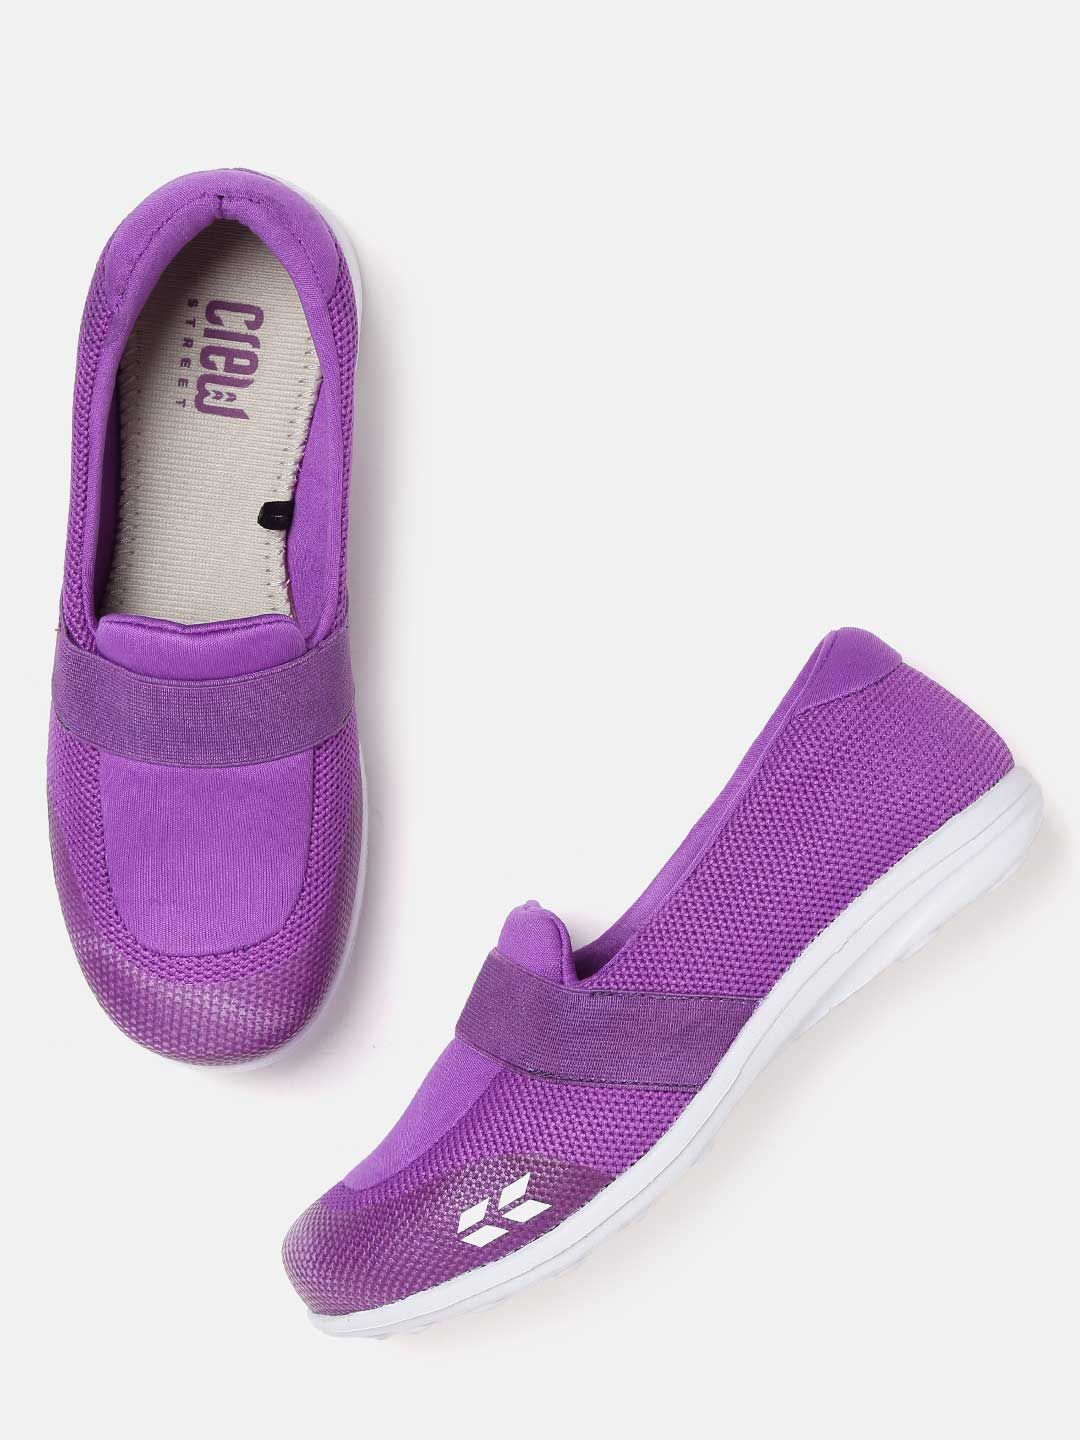 Crew STREET Women Purple Solid Running Shoes Price in India